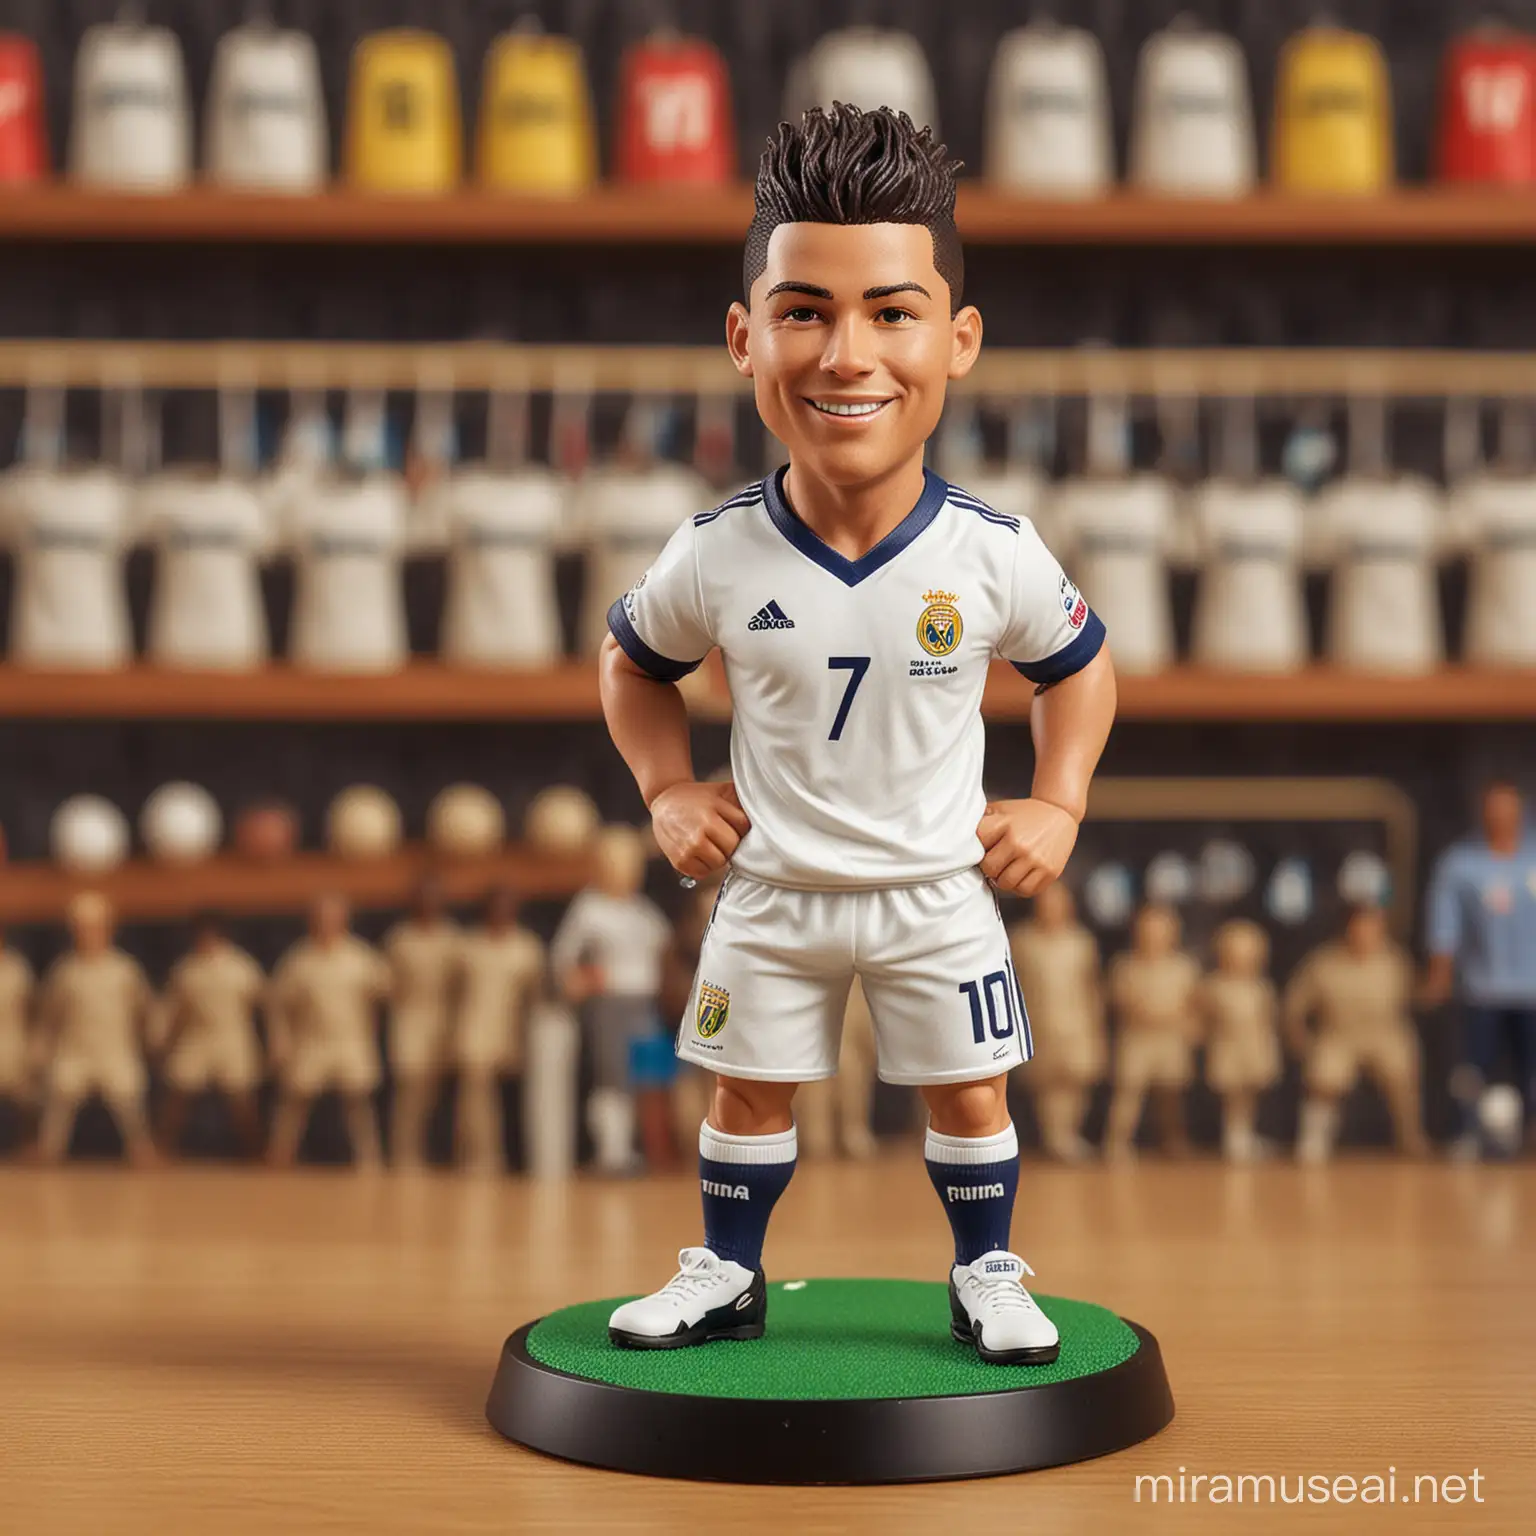 HD, Ultra detailed, real images. A table on which there is a 3d toy figure of player look like Ronaldo with big smile on face.dribbling the ball,  shirt with logo puma on his chest, white soccer pants with number 10,and dreadlock man bun style hair.On a plastic toy stand. The image created must refer to and be exactly the same as the iconic photo of player  look like Ronaldo on the internet.in the toy store in the background.